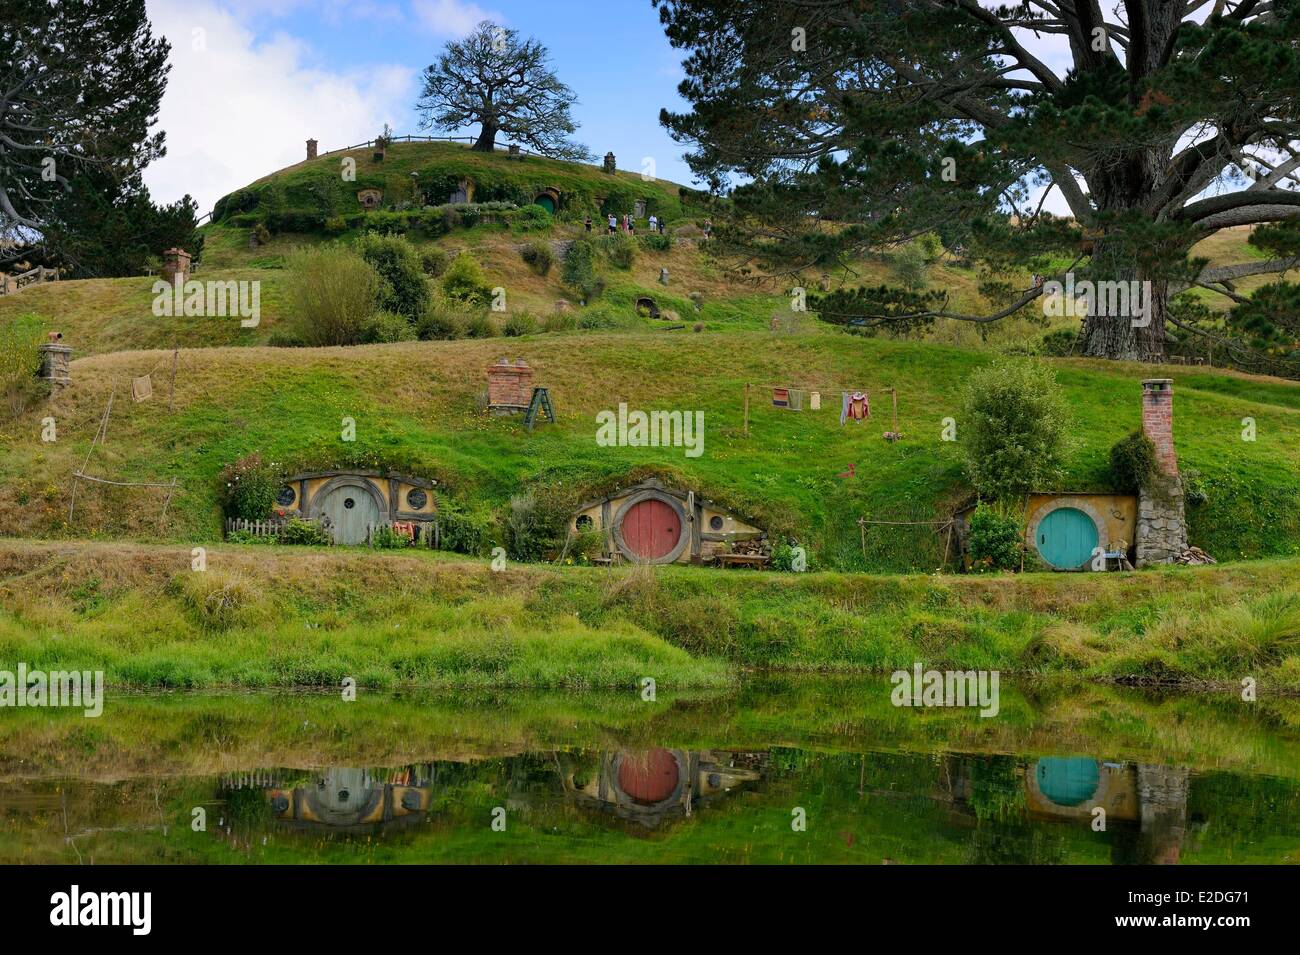 New Zealand North Island Matamata Hobbiton the hobbit village built for the movie Lord of the Rings by Peter Jackson Stock Photo